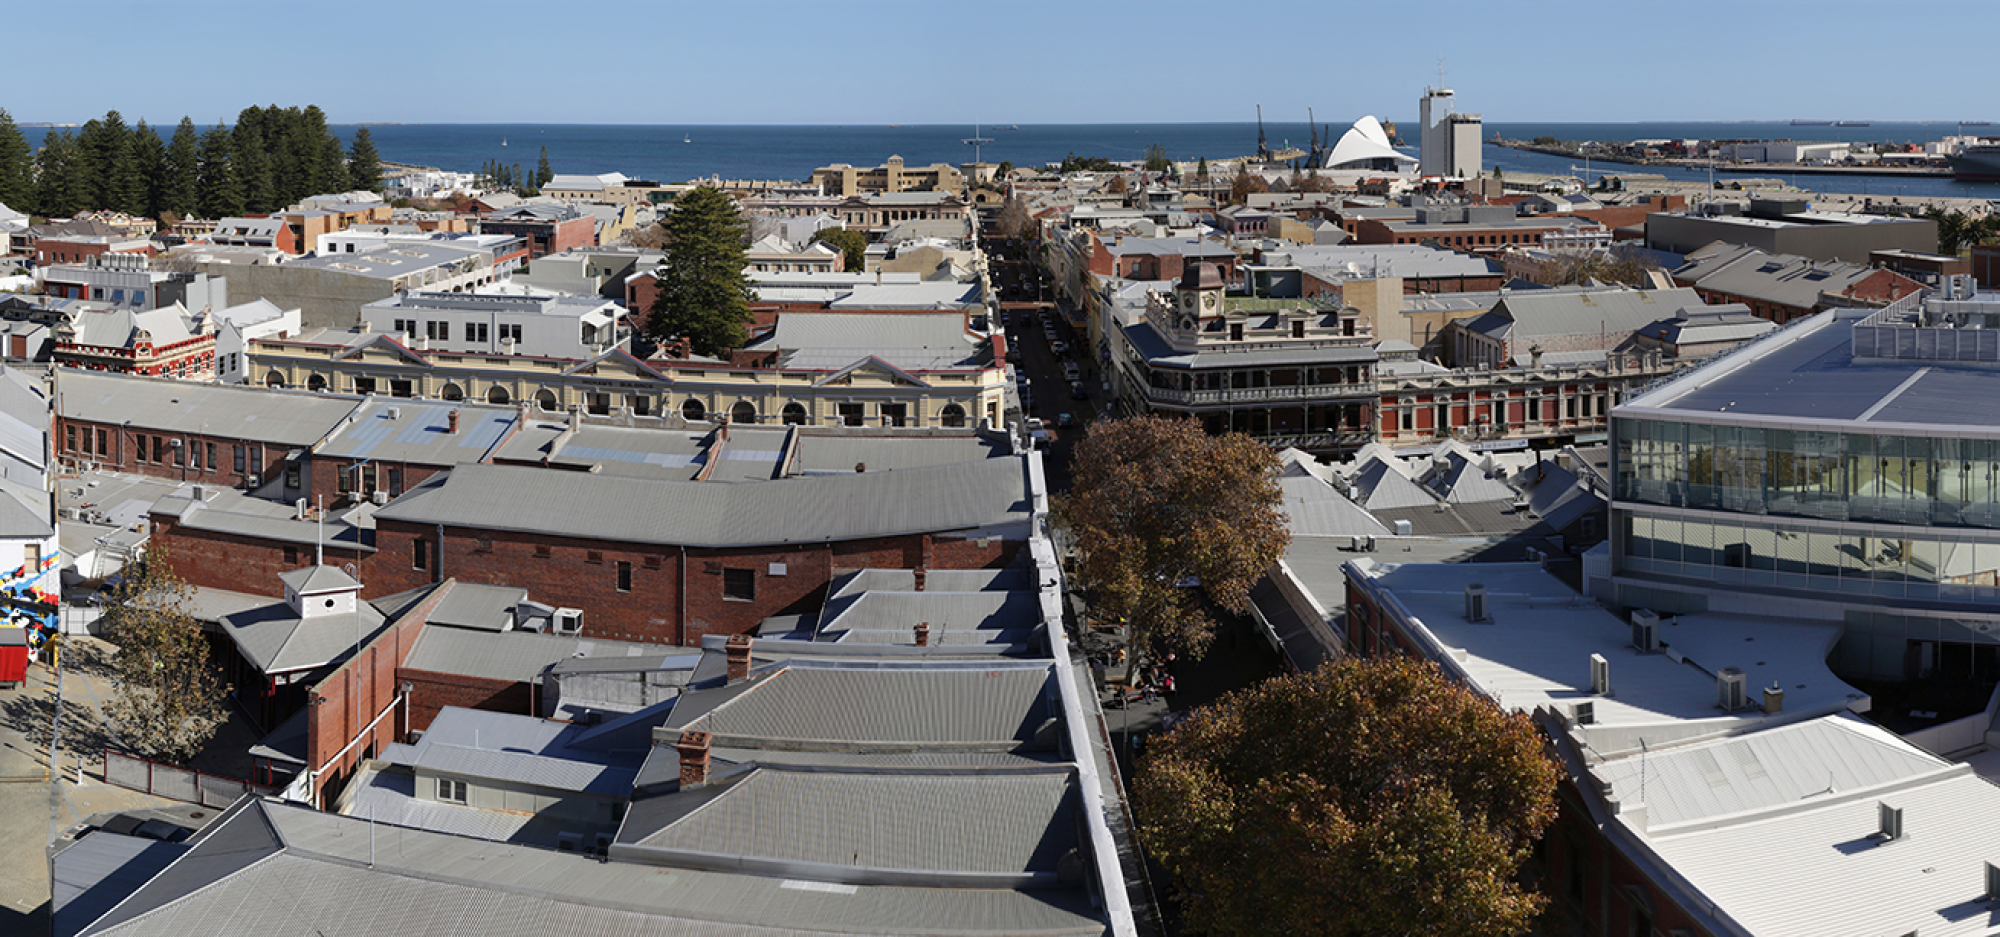 An aerial view of Fremantle